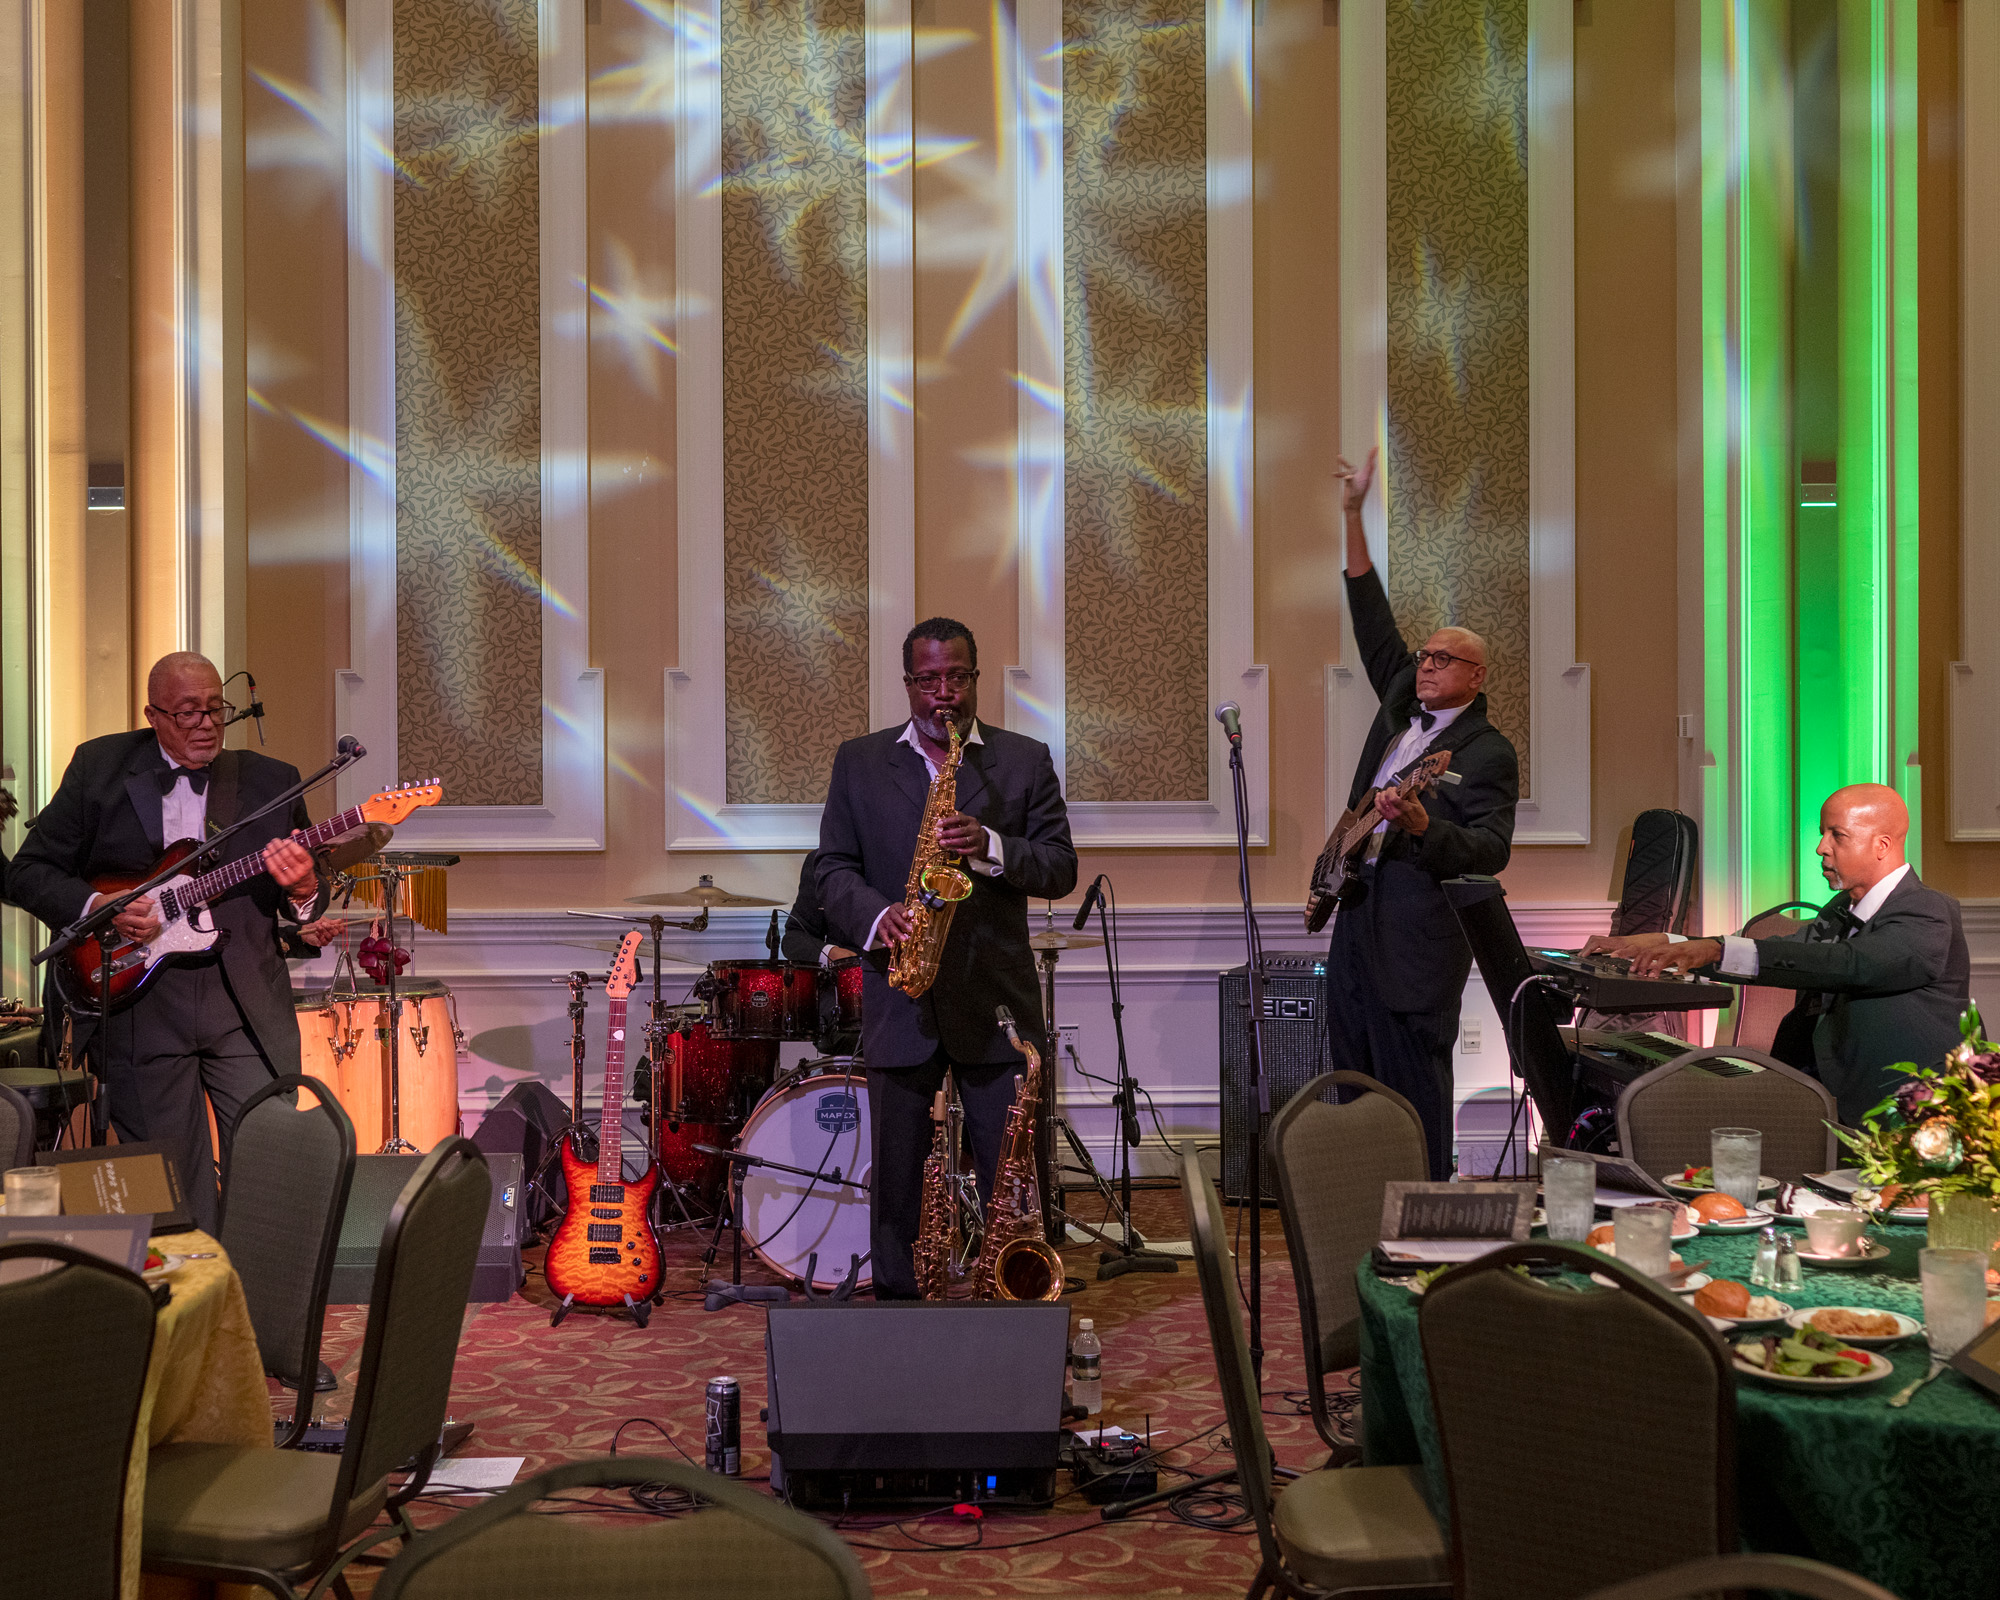 BAR Gala attendees were treated to the sounds of the Urban Jazz Coalition.